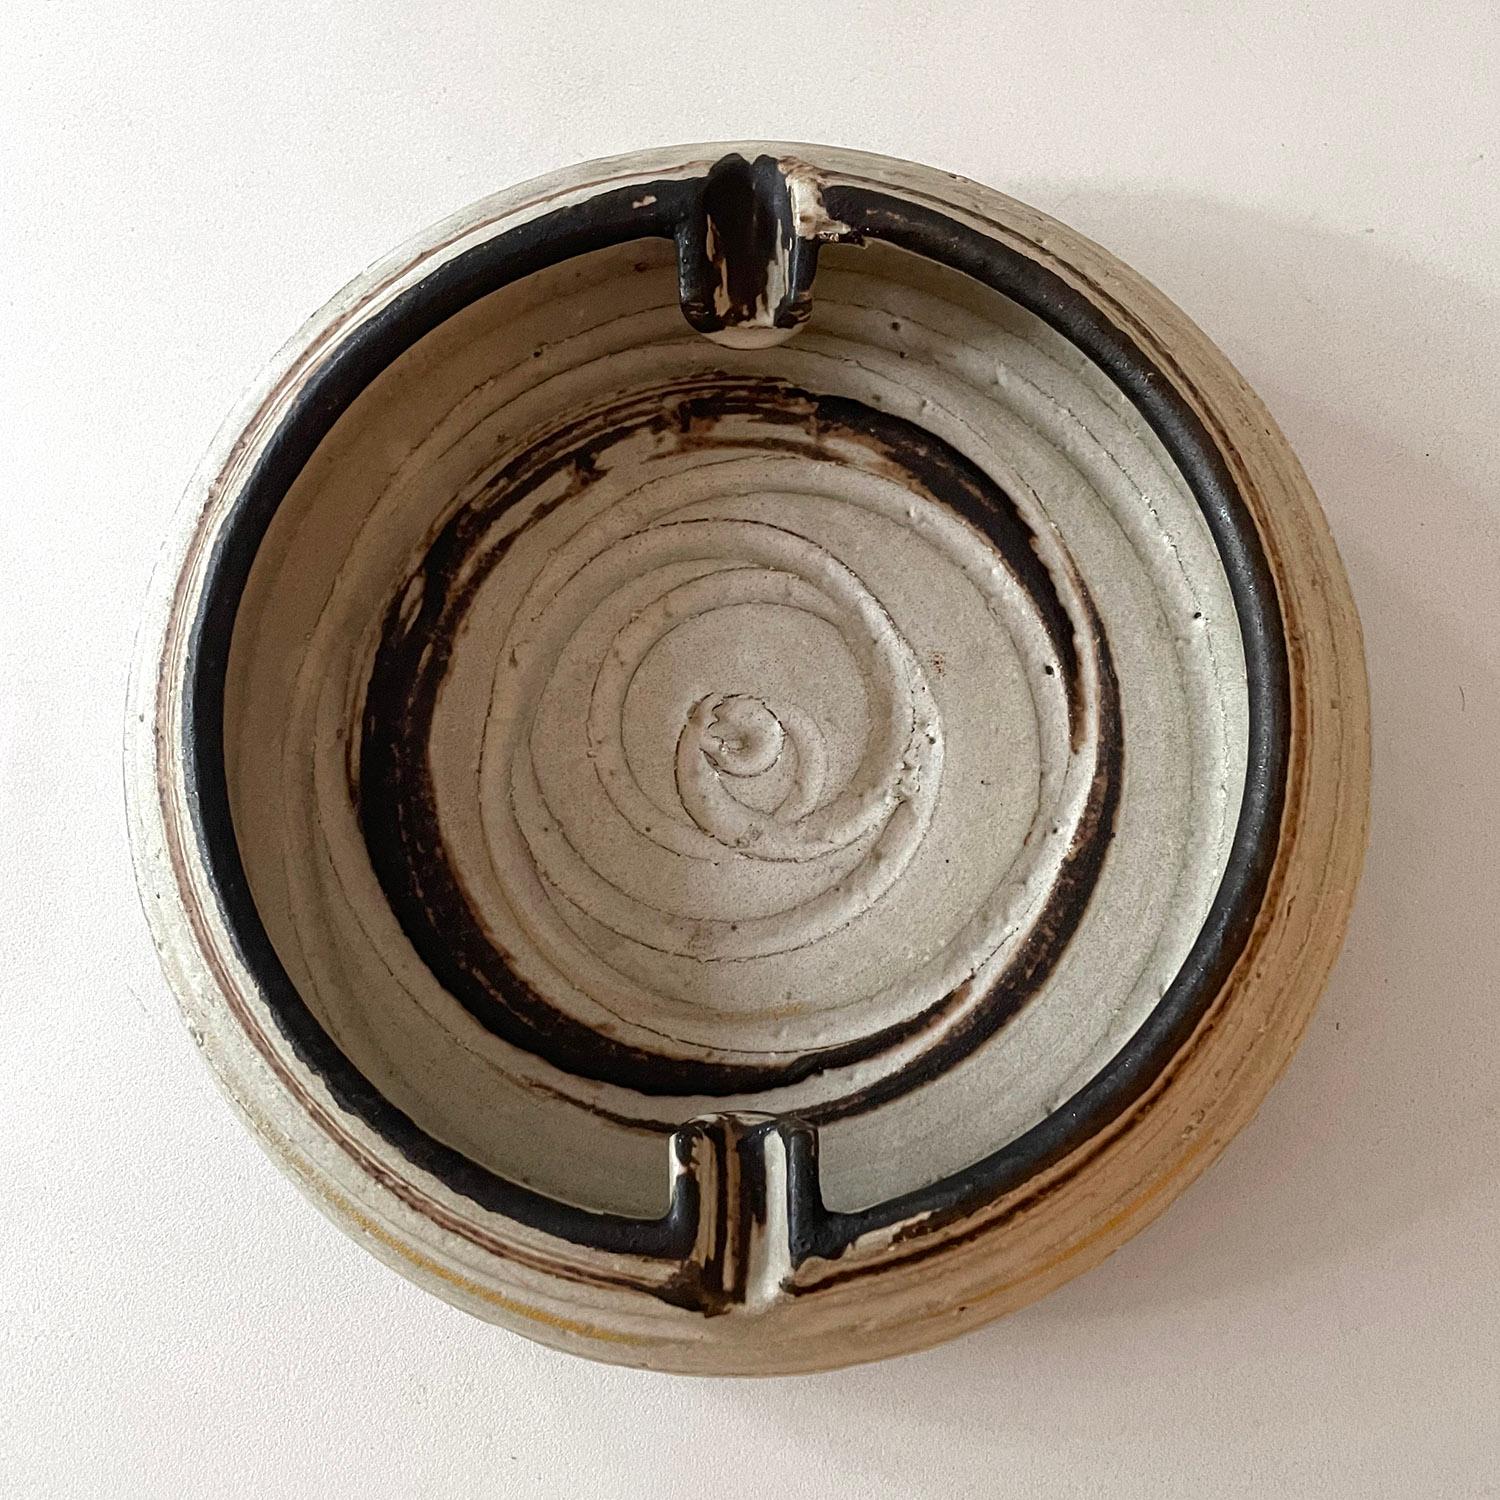 Rosenthal Netter ashtray catch all
Italy, circa 1970’s 
Organic composition and feel 
Neutral tones 
Marked identification 
Three sizes available, each sold separately
Last photo is for size reference only